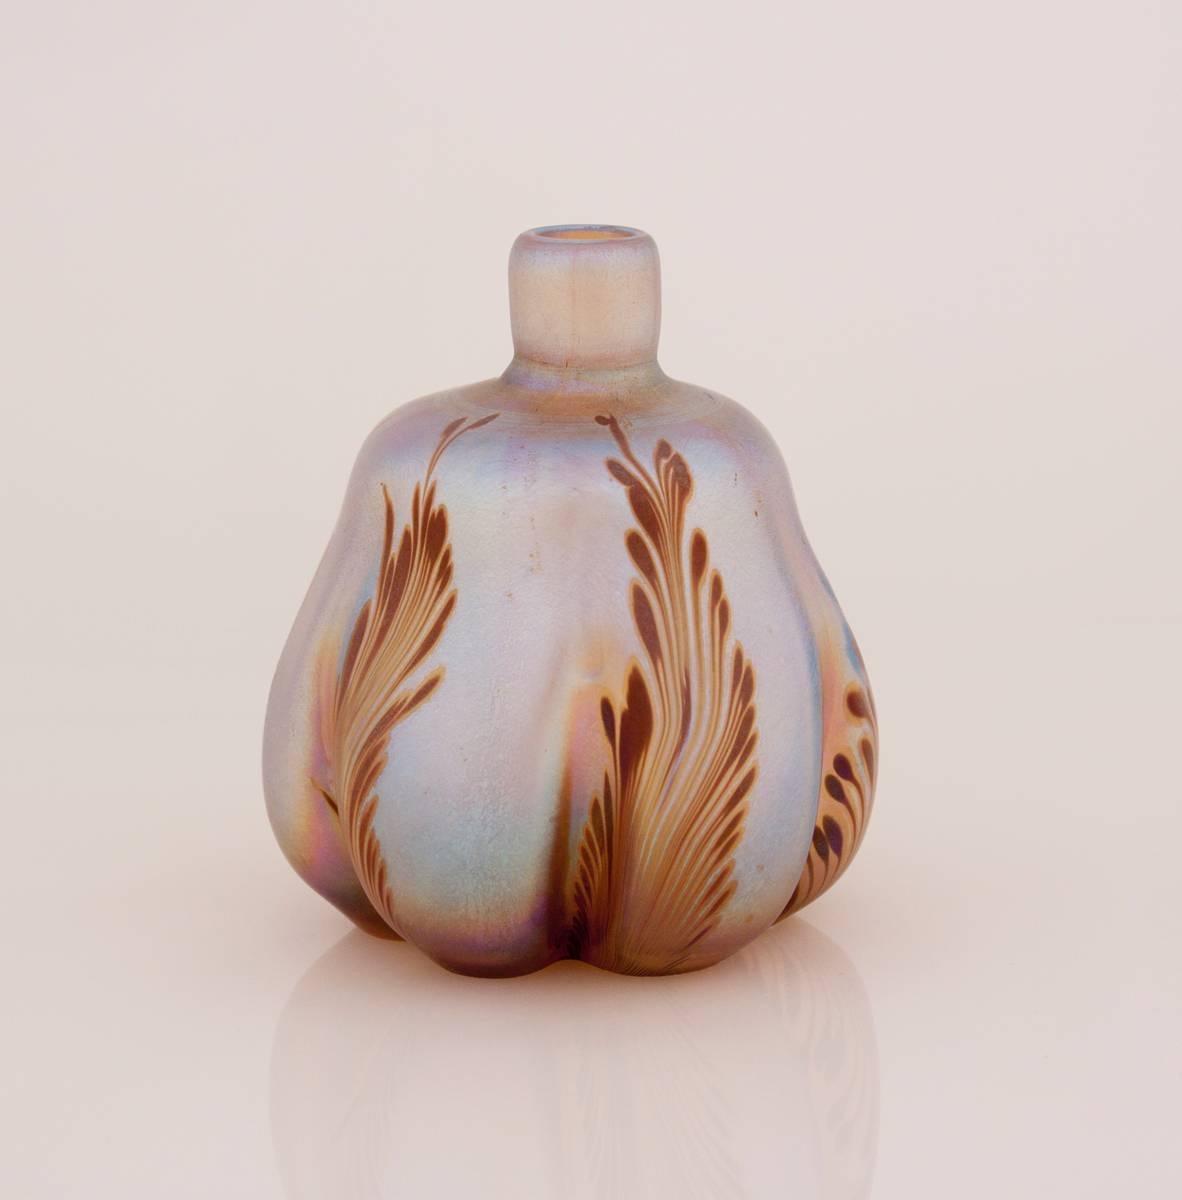 An early Tiffany Studios favrile glass lobed vase decorated with maroon feathering, signed.